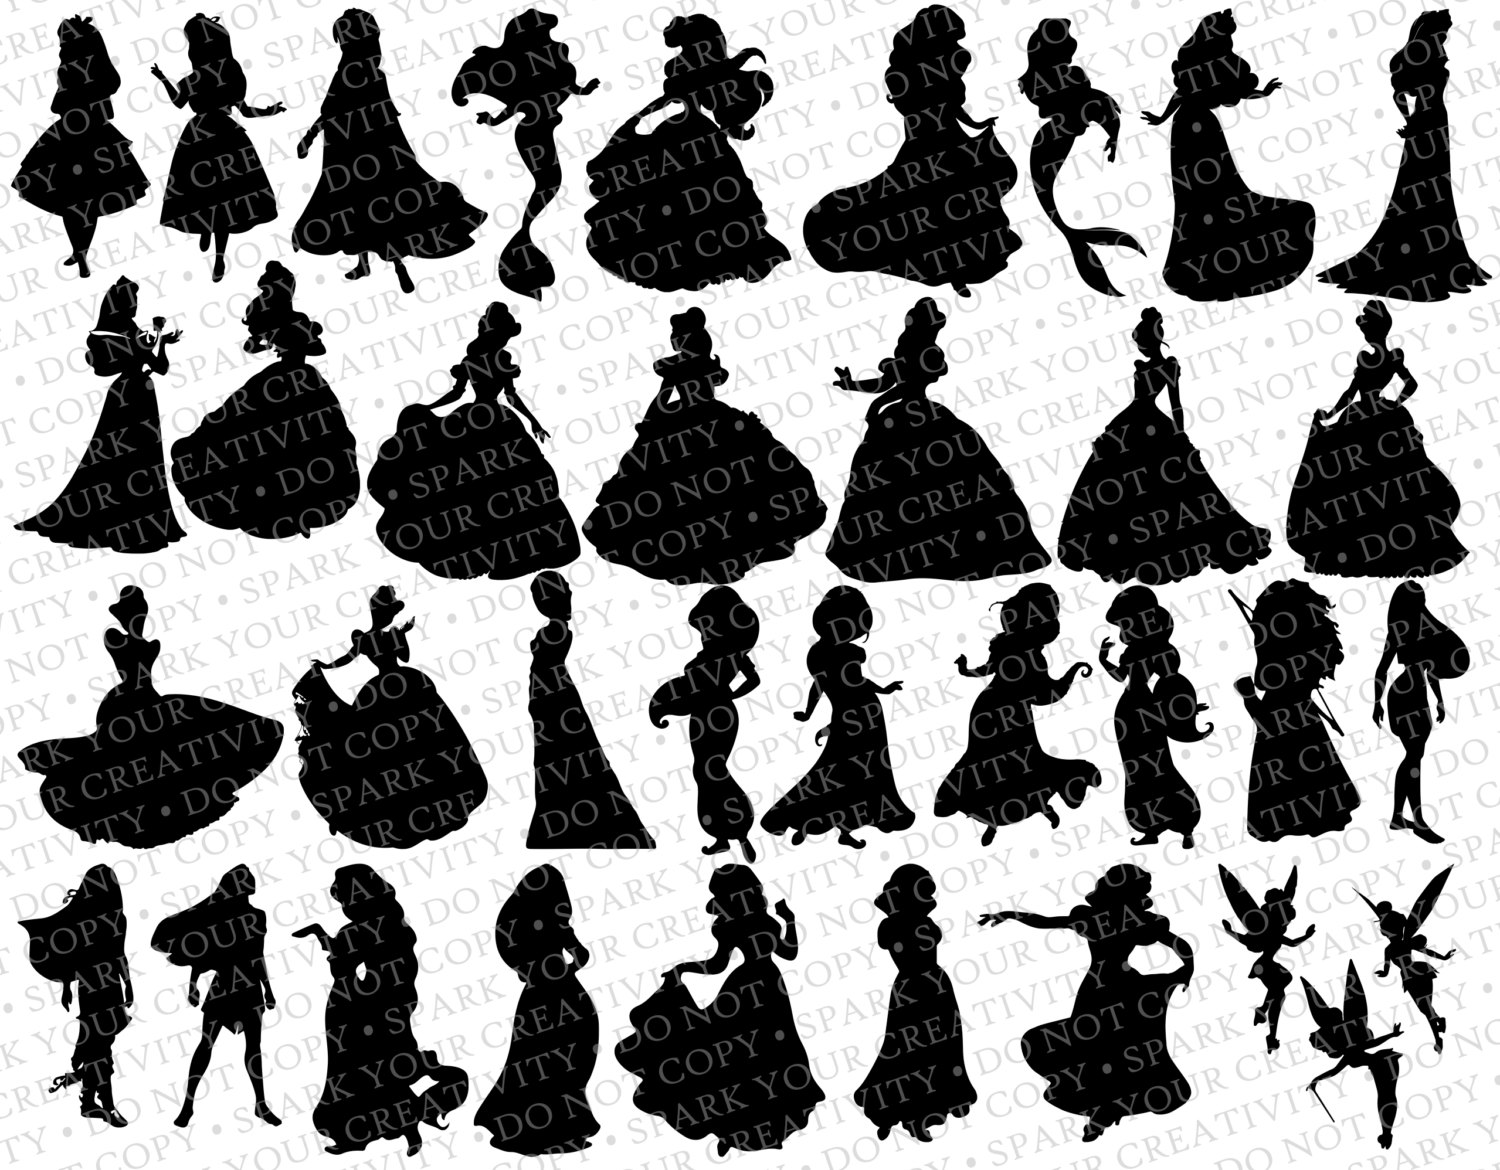 Disney Princess Silhouettes    35 By Sparkyourcreativity On Etsy